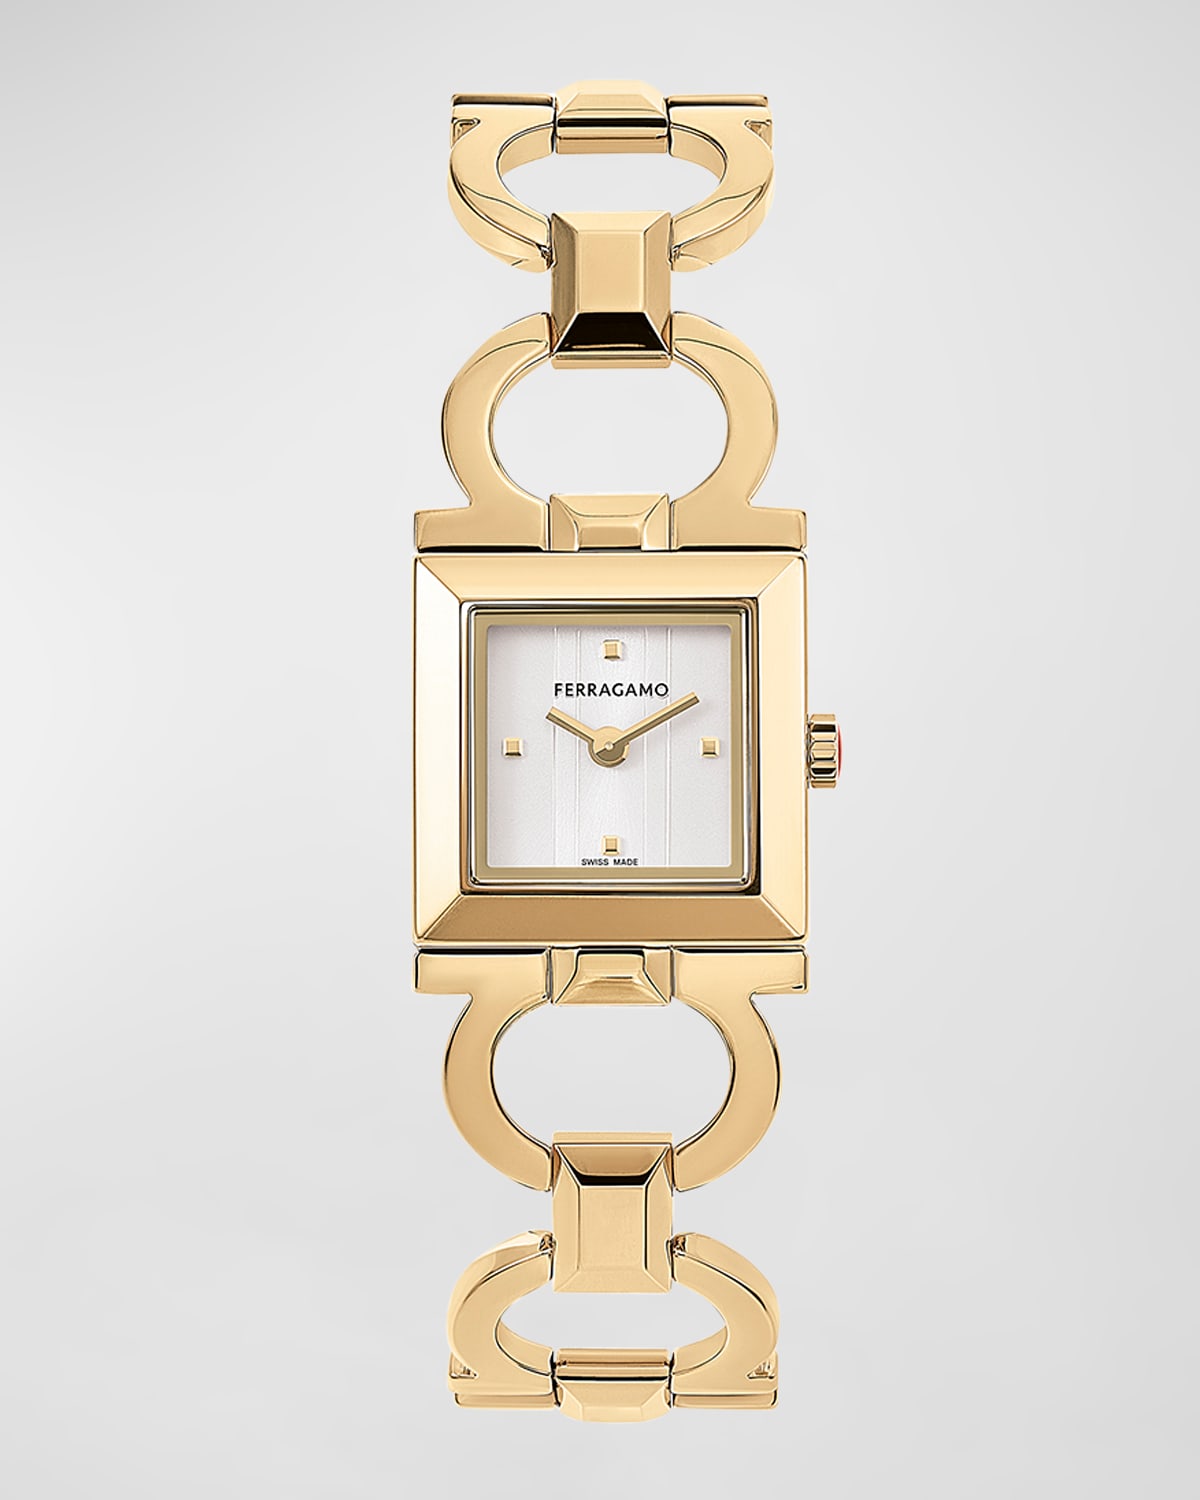 FERRAGAMO 20MM DOUBLE GANCINI SQUARE WATCH WITH BRACELET STRAP, YELLOW GOLD